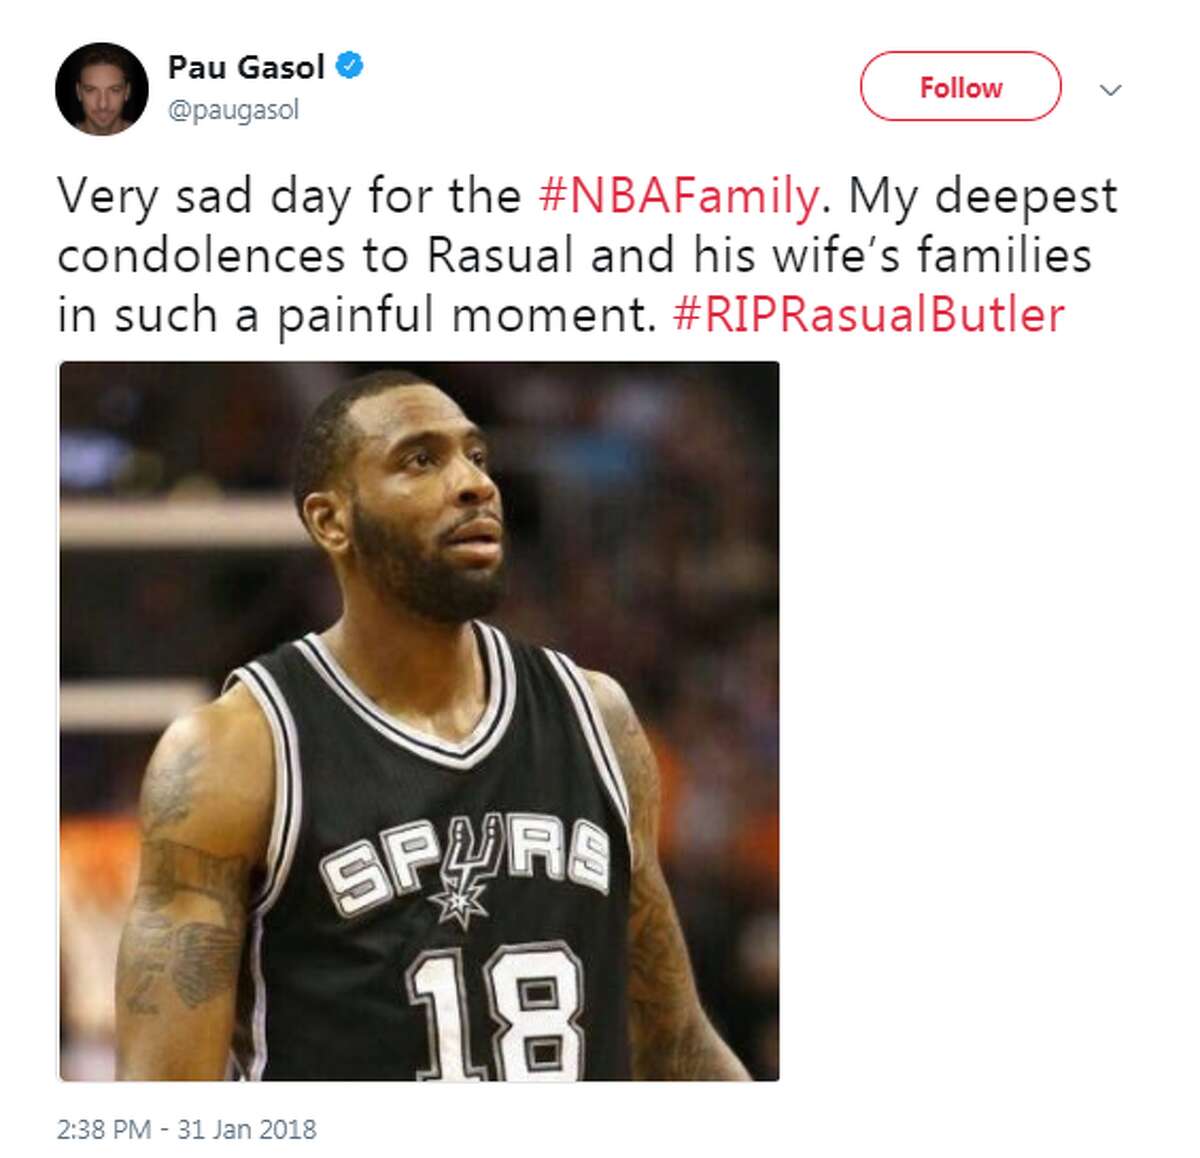 Paul Gasol: Very sad day for the #NBAFamily. My deepest condolences to Rasual and his wife’s families in such a painful moment. #RIPRasualButler